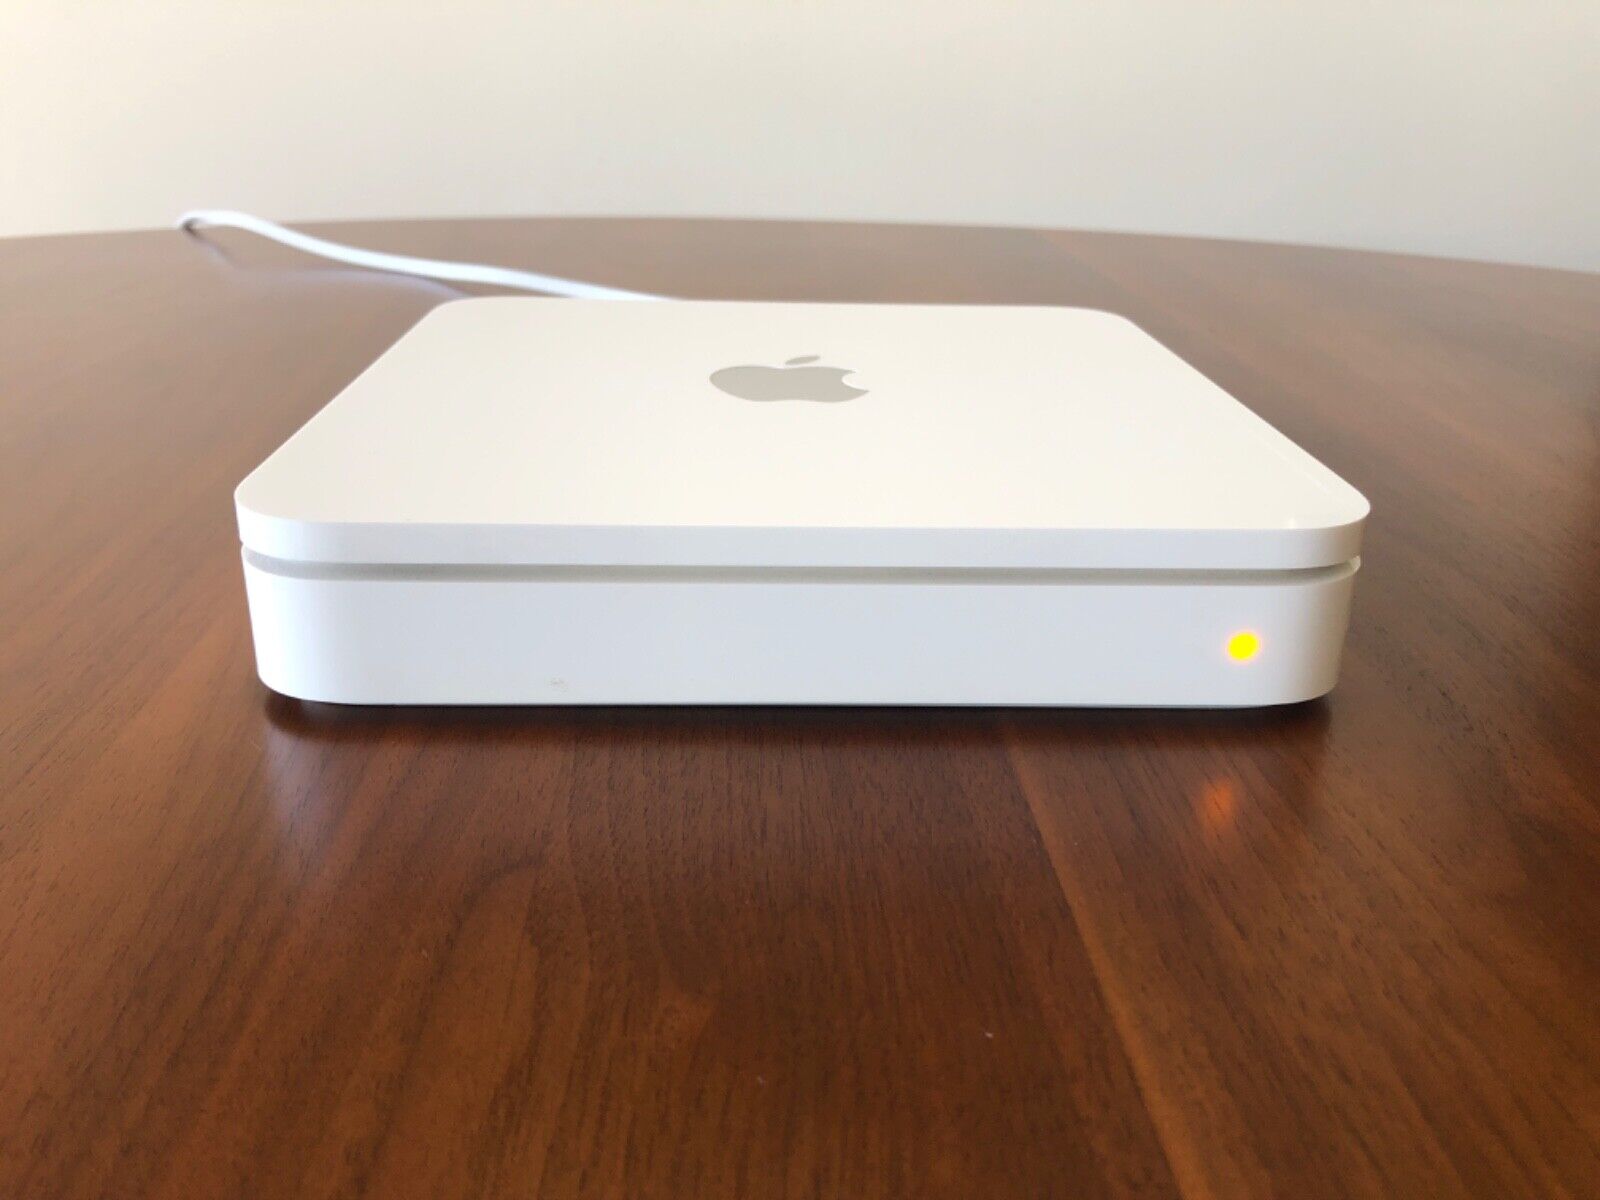 Apple AirPort Time Capsule 3rd Generation 802.11n Wi-Fi 1TB Router + Wall Mount